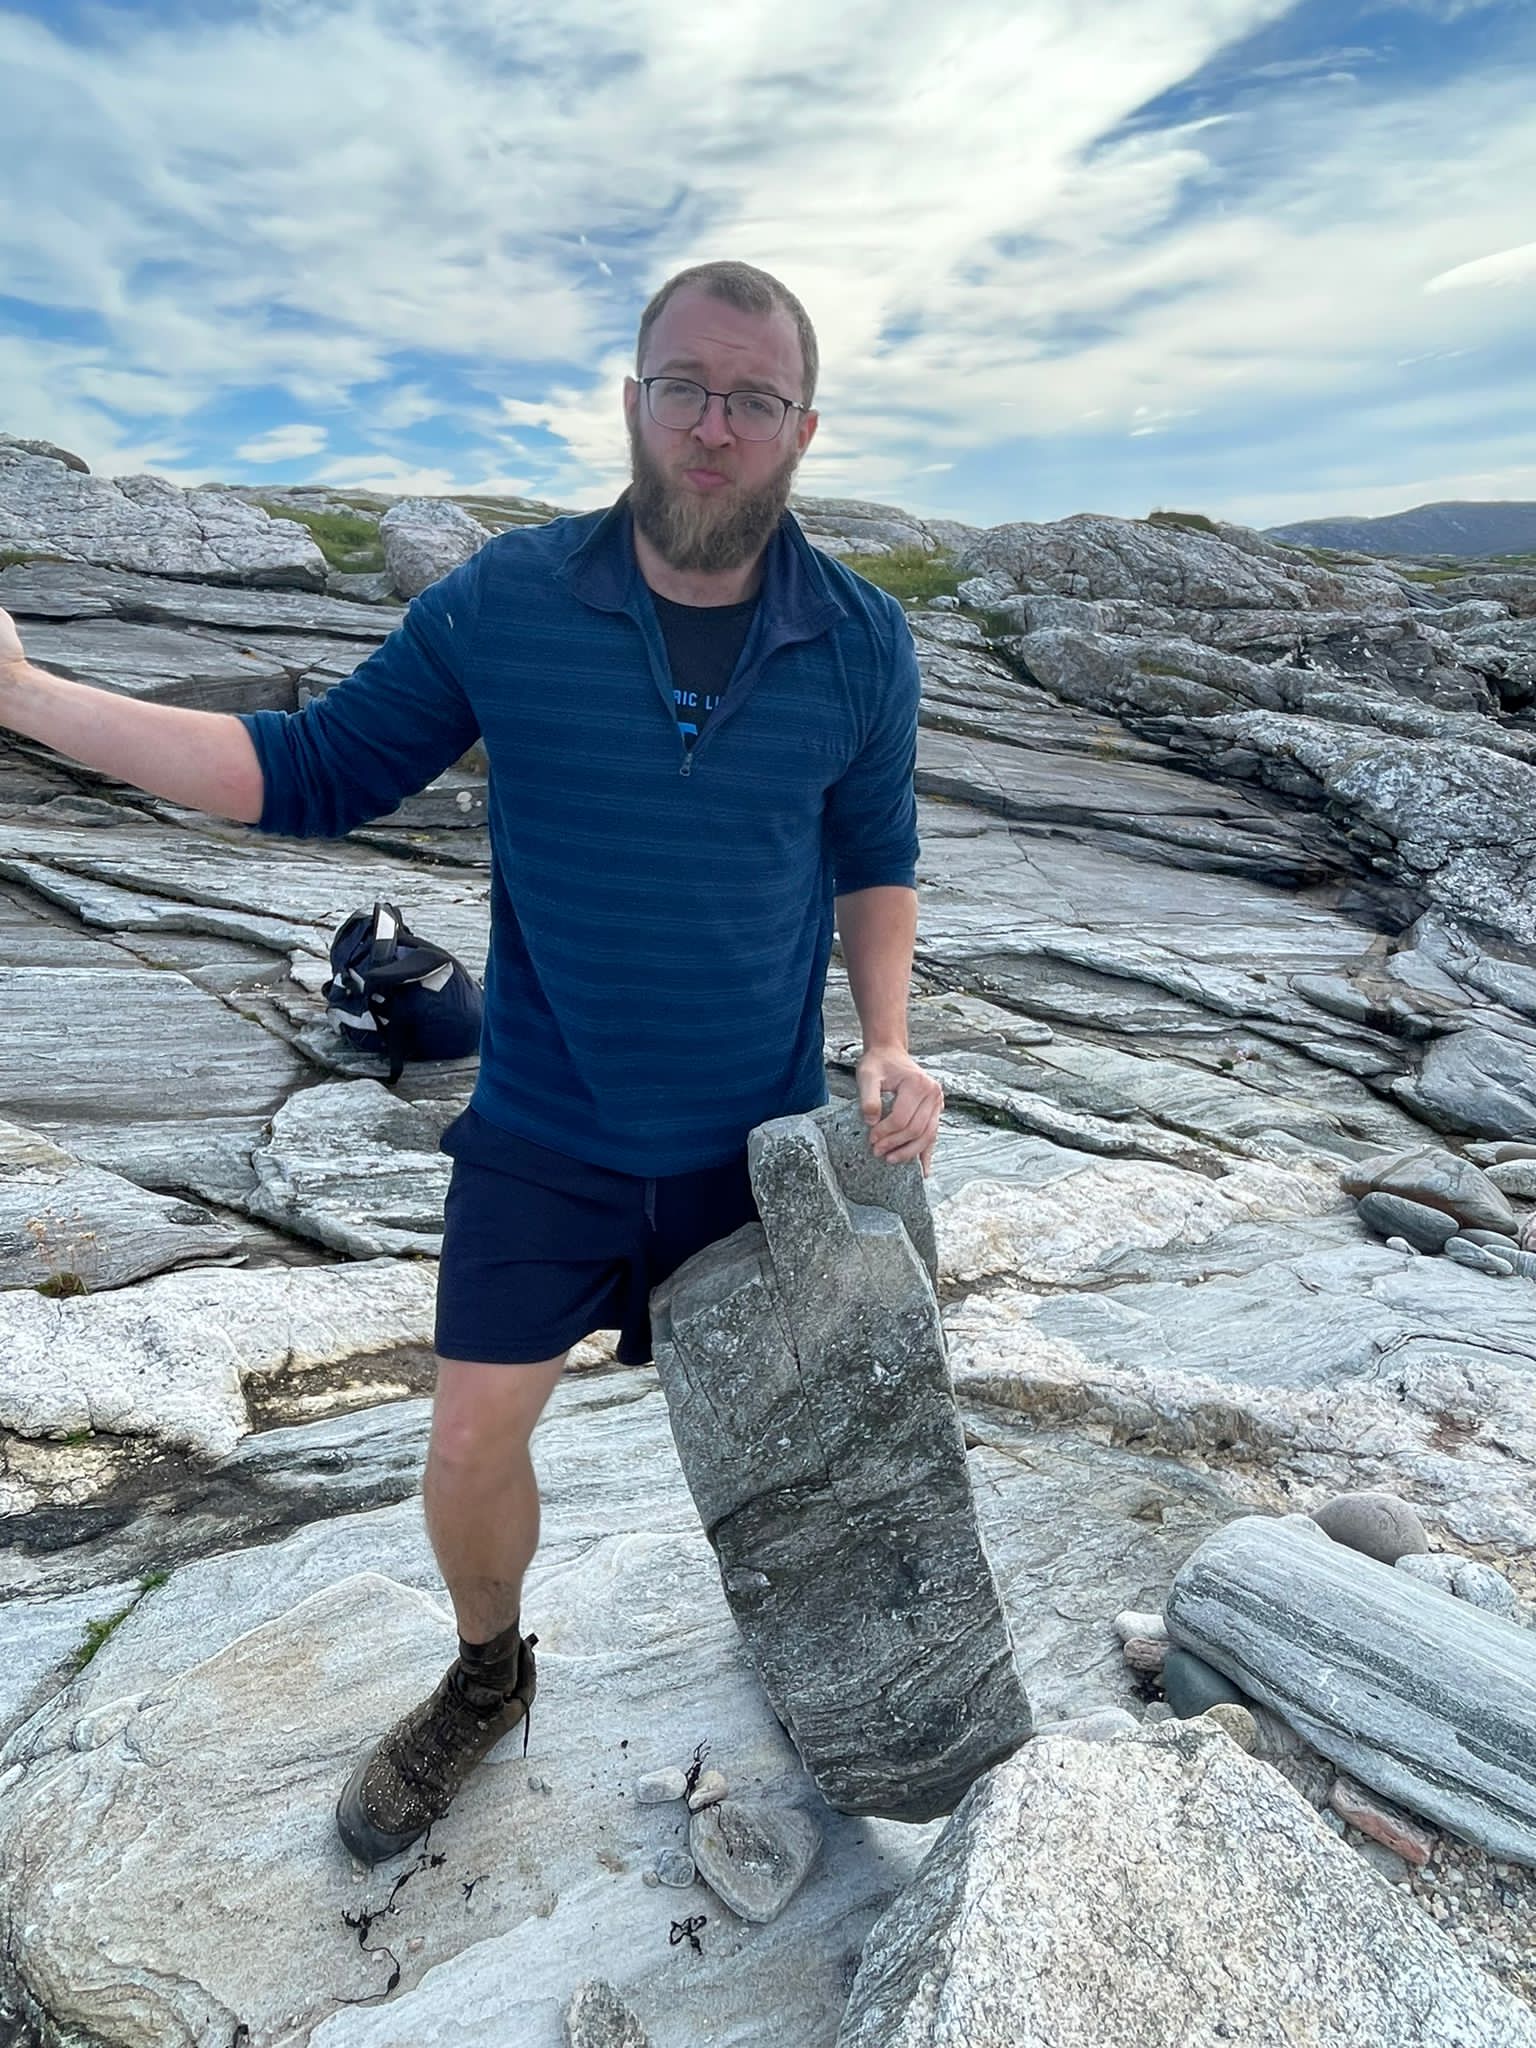 Jacob stands holding a large broken stone upright, balanced on the ground.